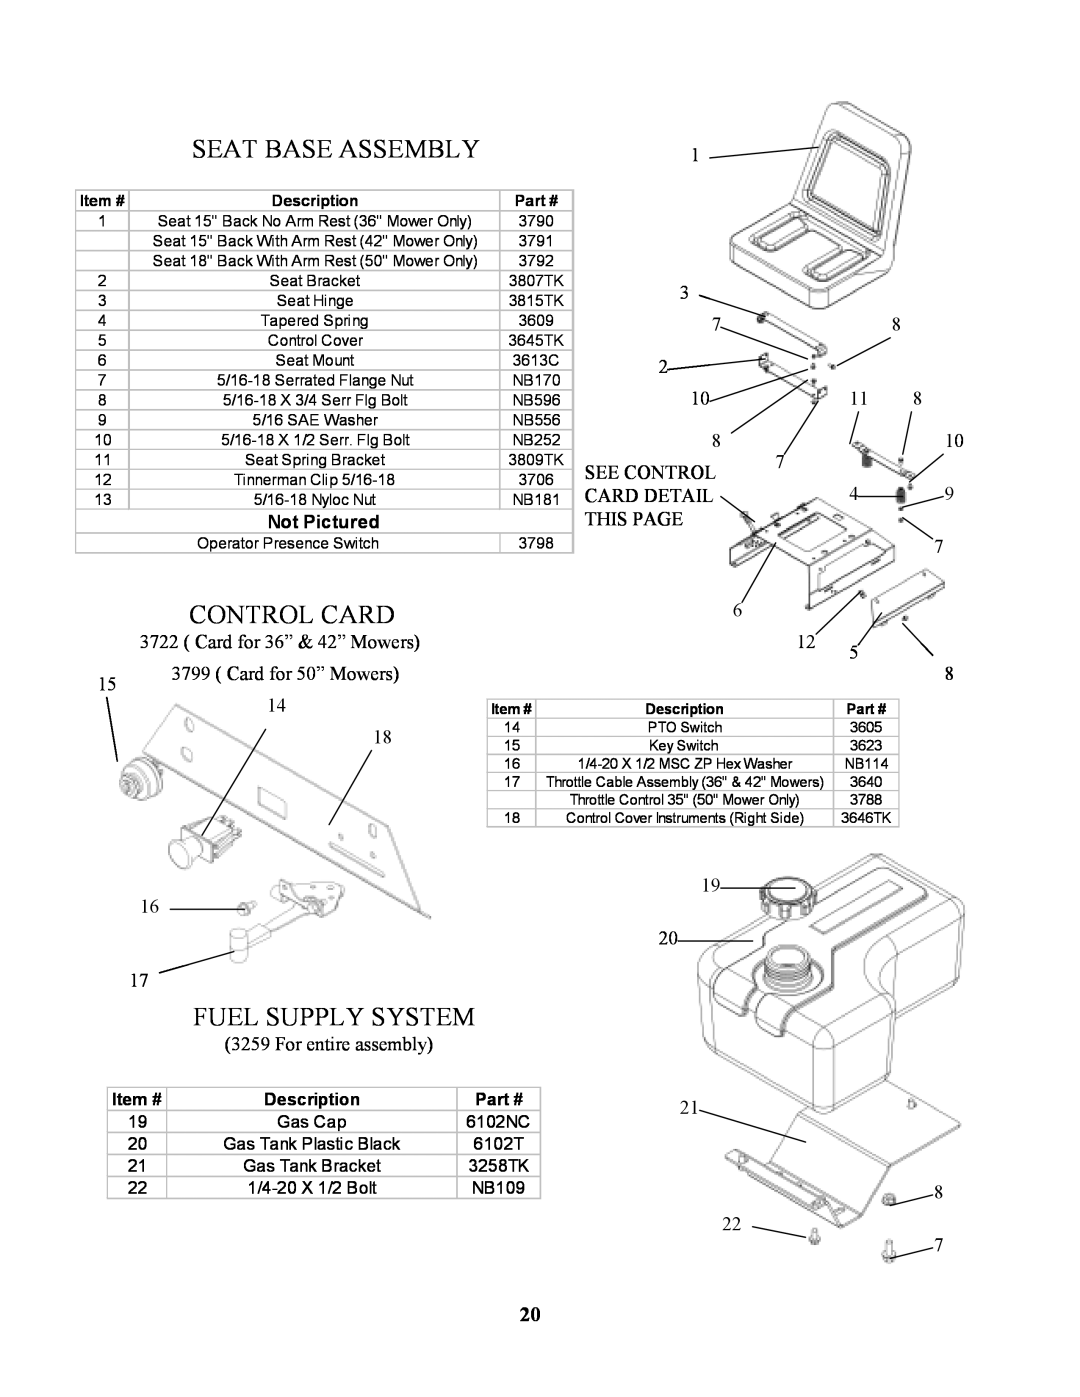 Swisher ZT1436, ZT17542B, ZT1842, ZT20050 Seat Base Assembly, Control Card, Fuel Supply System, See Control, Card Detail 